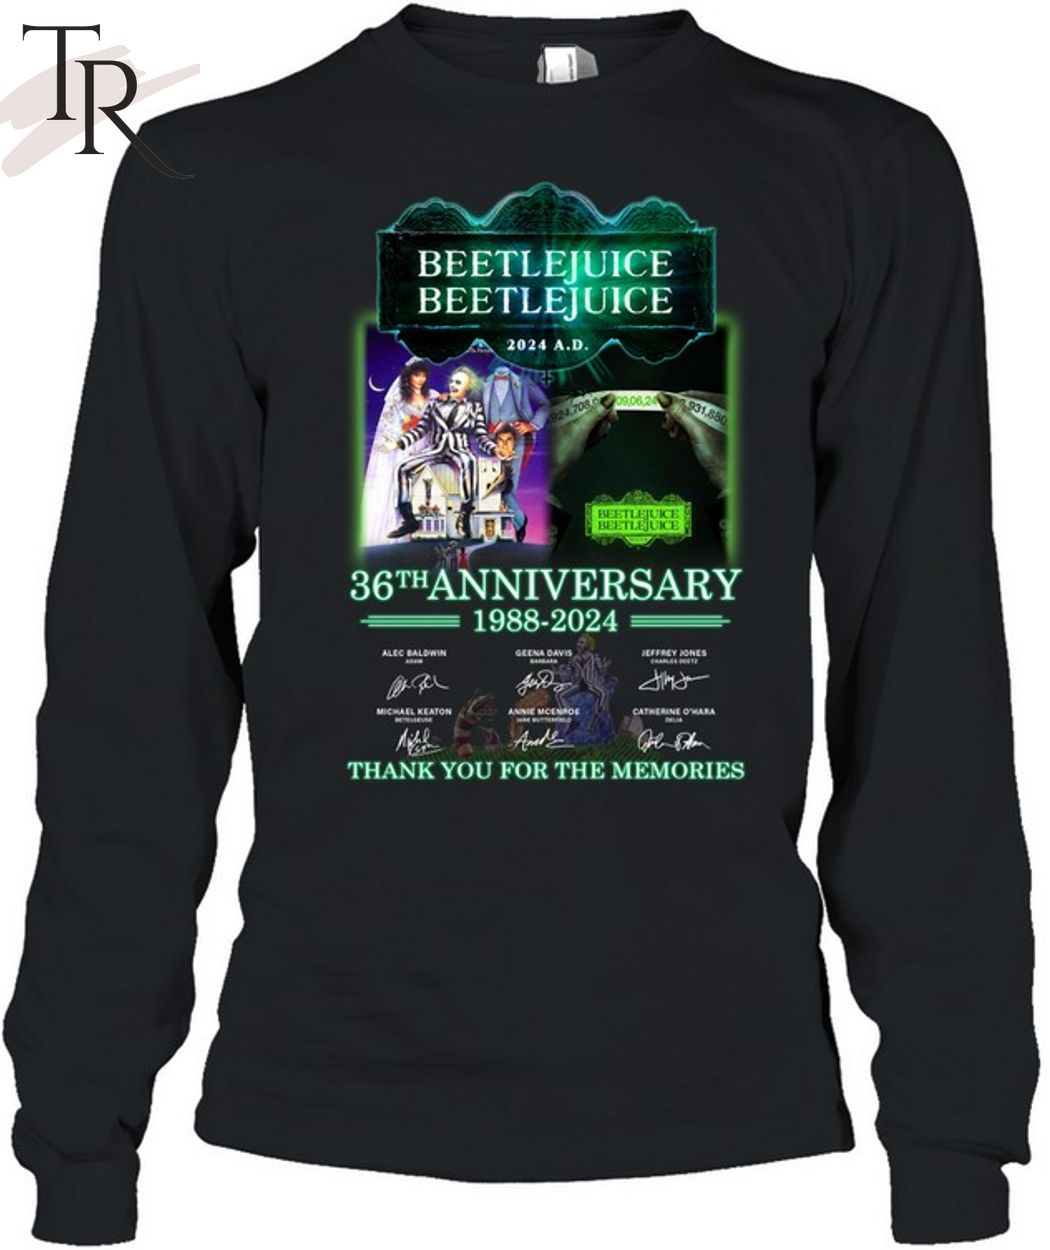 Beetlejuice 36th Anniversary 1988-2024 Thank You For The Memories T-Shirt